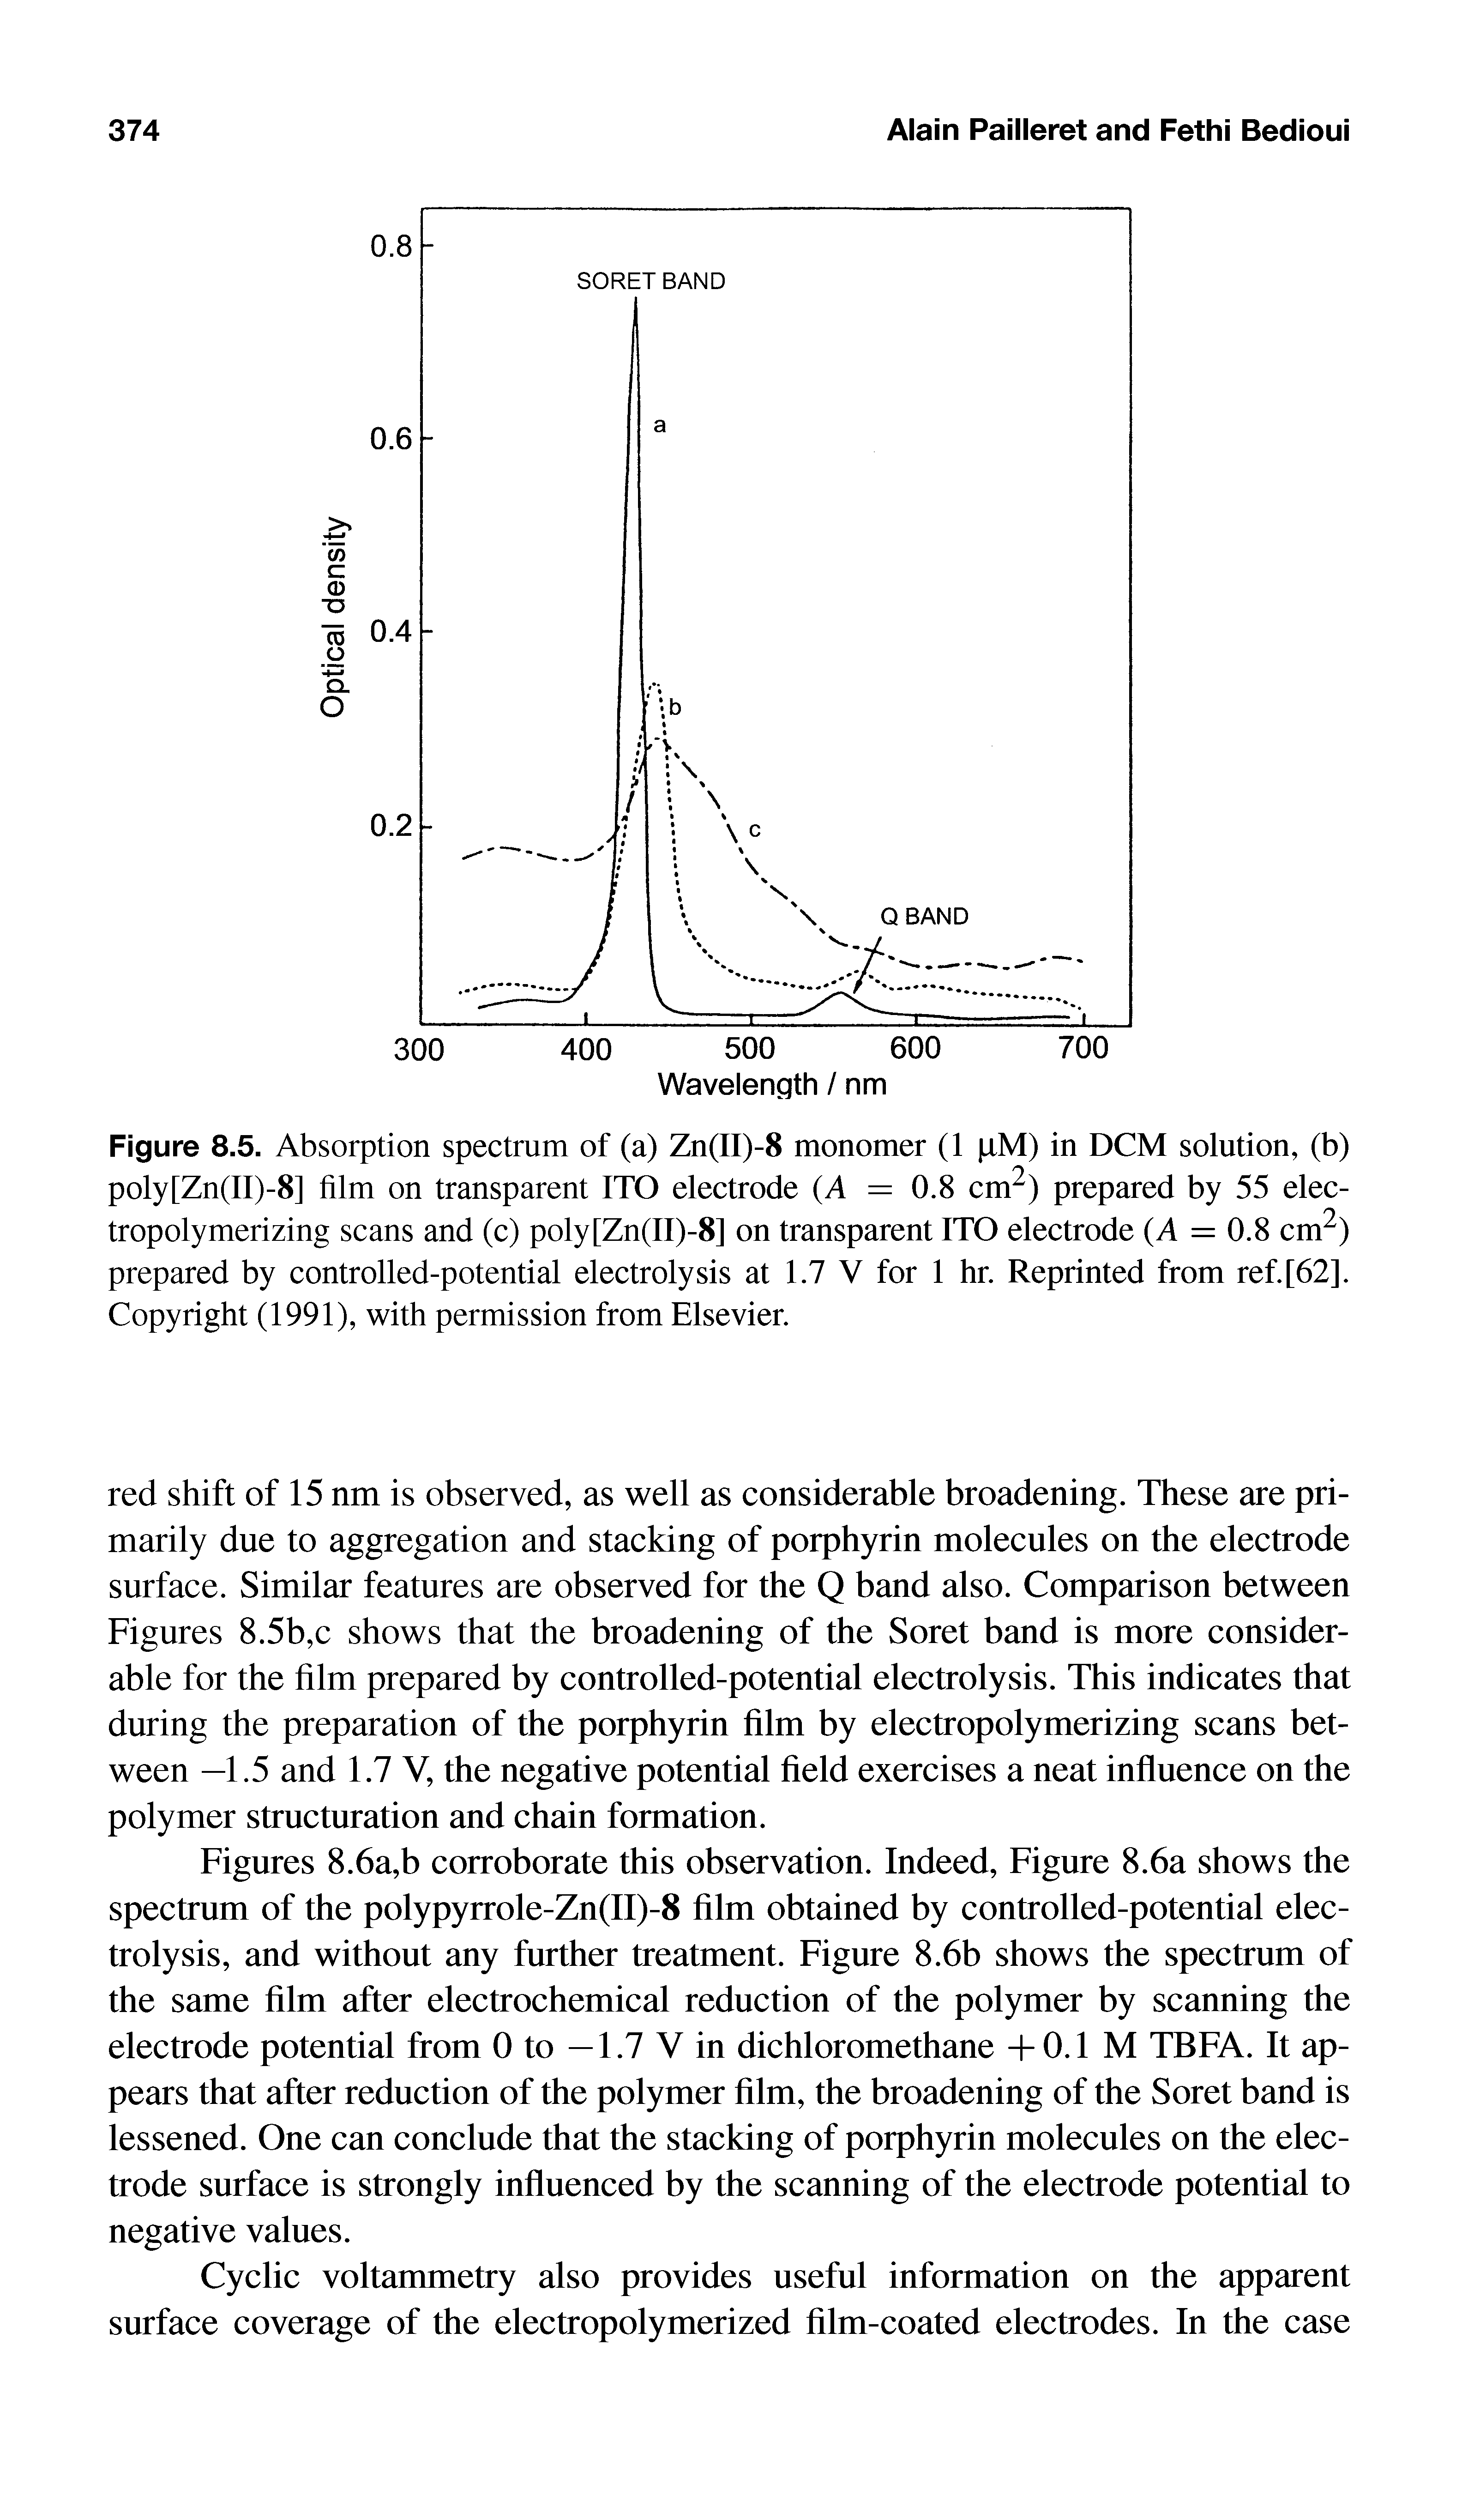 Figures 8.6a,b corroborate this observation. Indeed, Figure 8.6a shows the spectrum of the polypyrrole-Zn(II)-8 film obtained by controlled-potential electrolysis, and without any further treatment. Figure 8.6b shows the spectrum of the same film after electrochemical reduction of the polymer by scanning the electrode potential from 0 to — 1.7 V in dichloromethane -h 0.1 M TBFA. It appears that after reduction of the polymer film, the broadening of the Soret band is lessened. One can conclude that the stacking of porphyrin molecules on the electrode surface is strongly influenced by the scanning of the electrode potential to negative values.